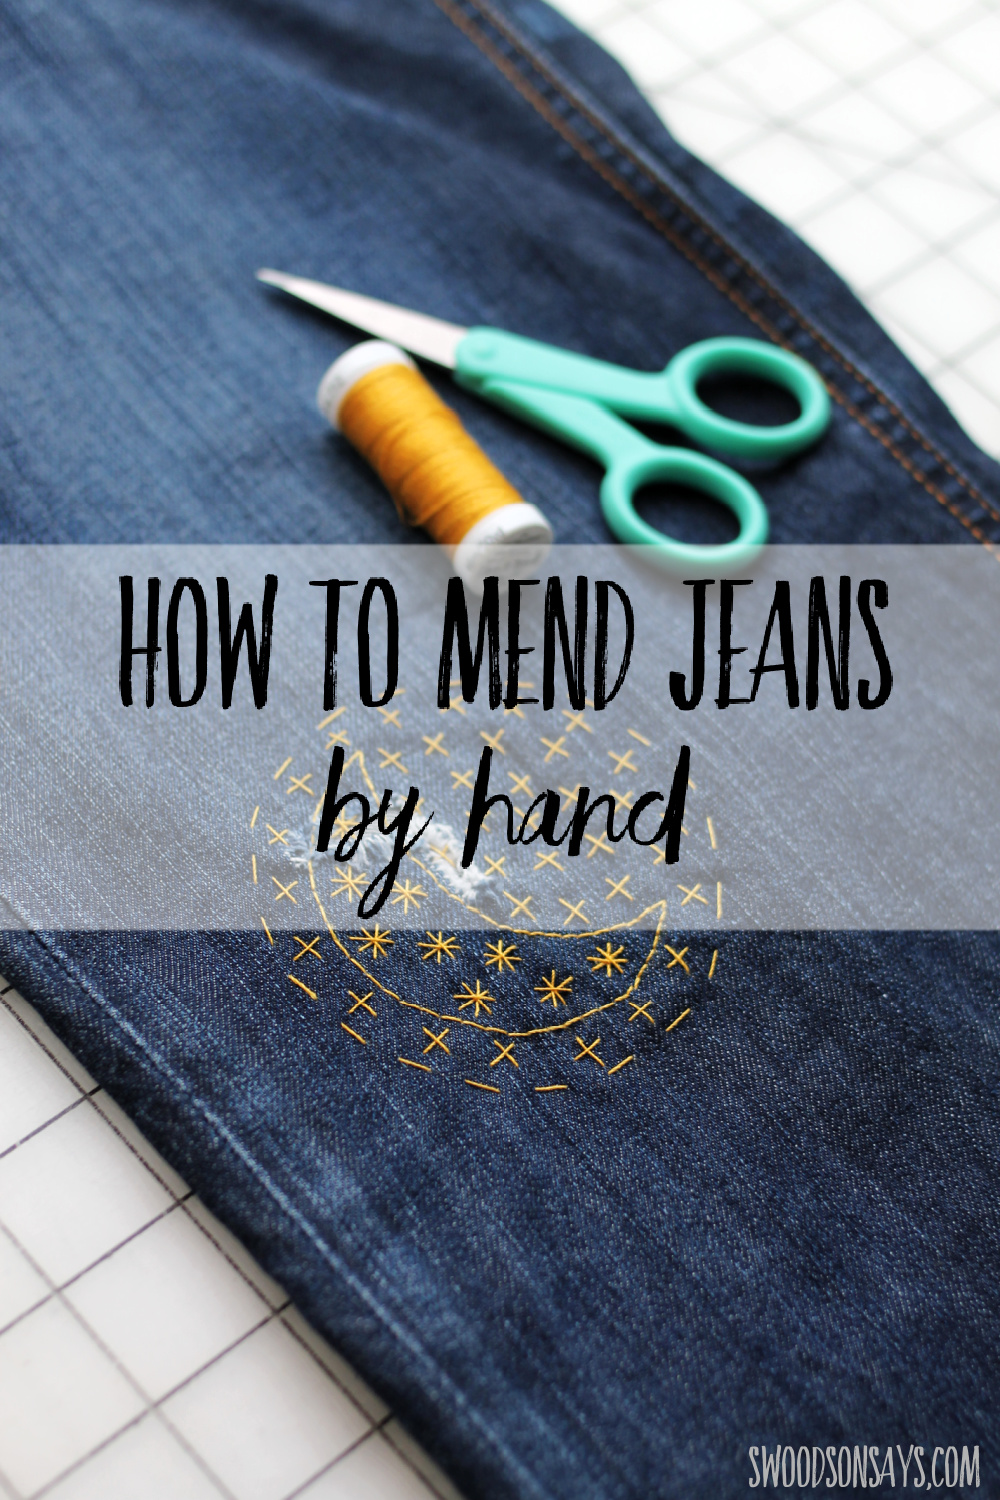 jeans mending embroidery pattern